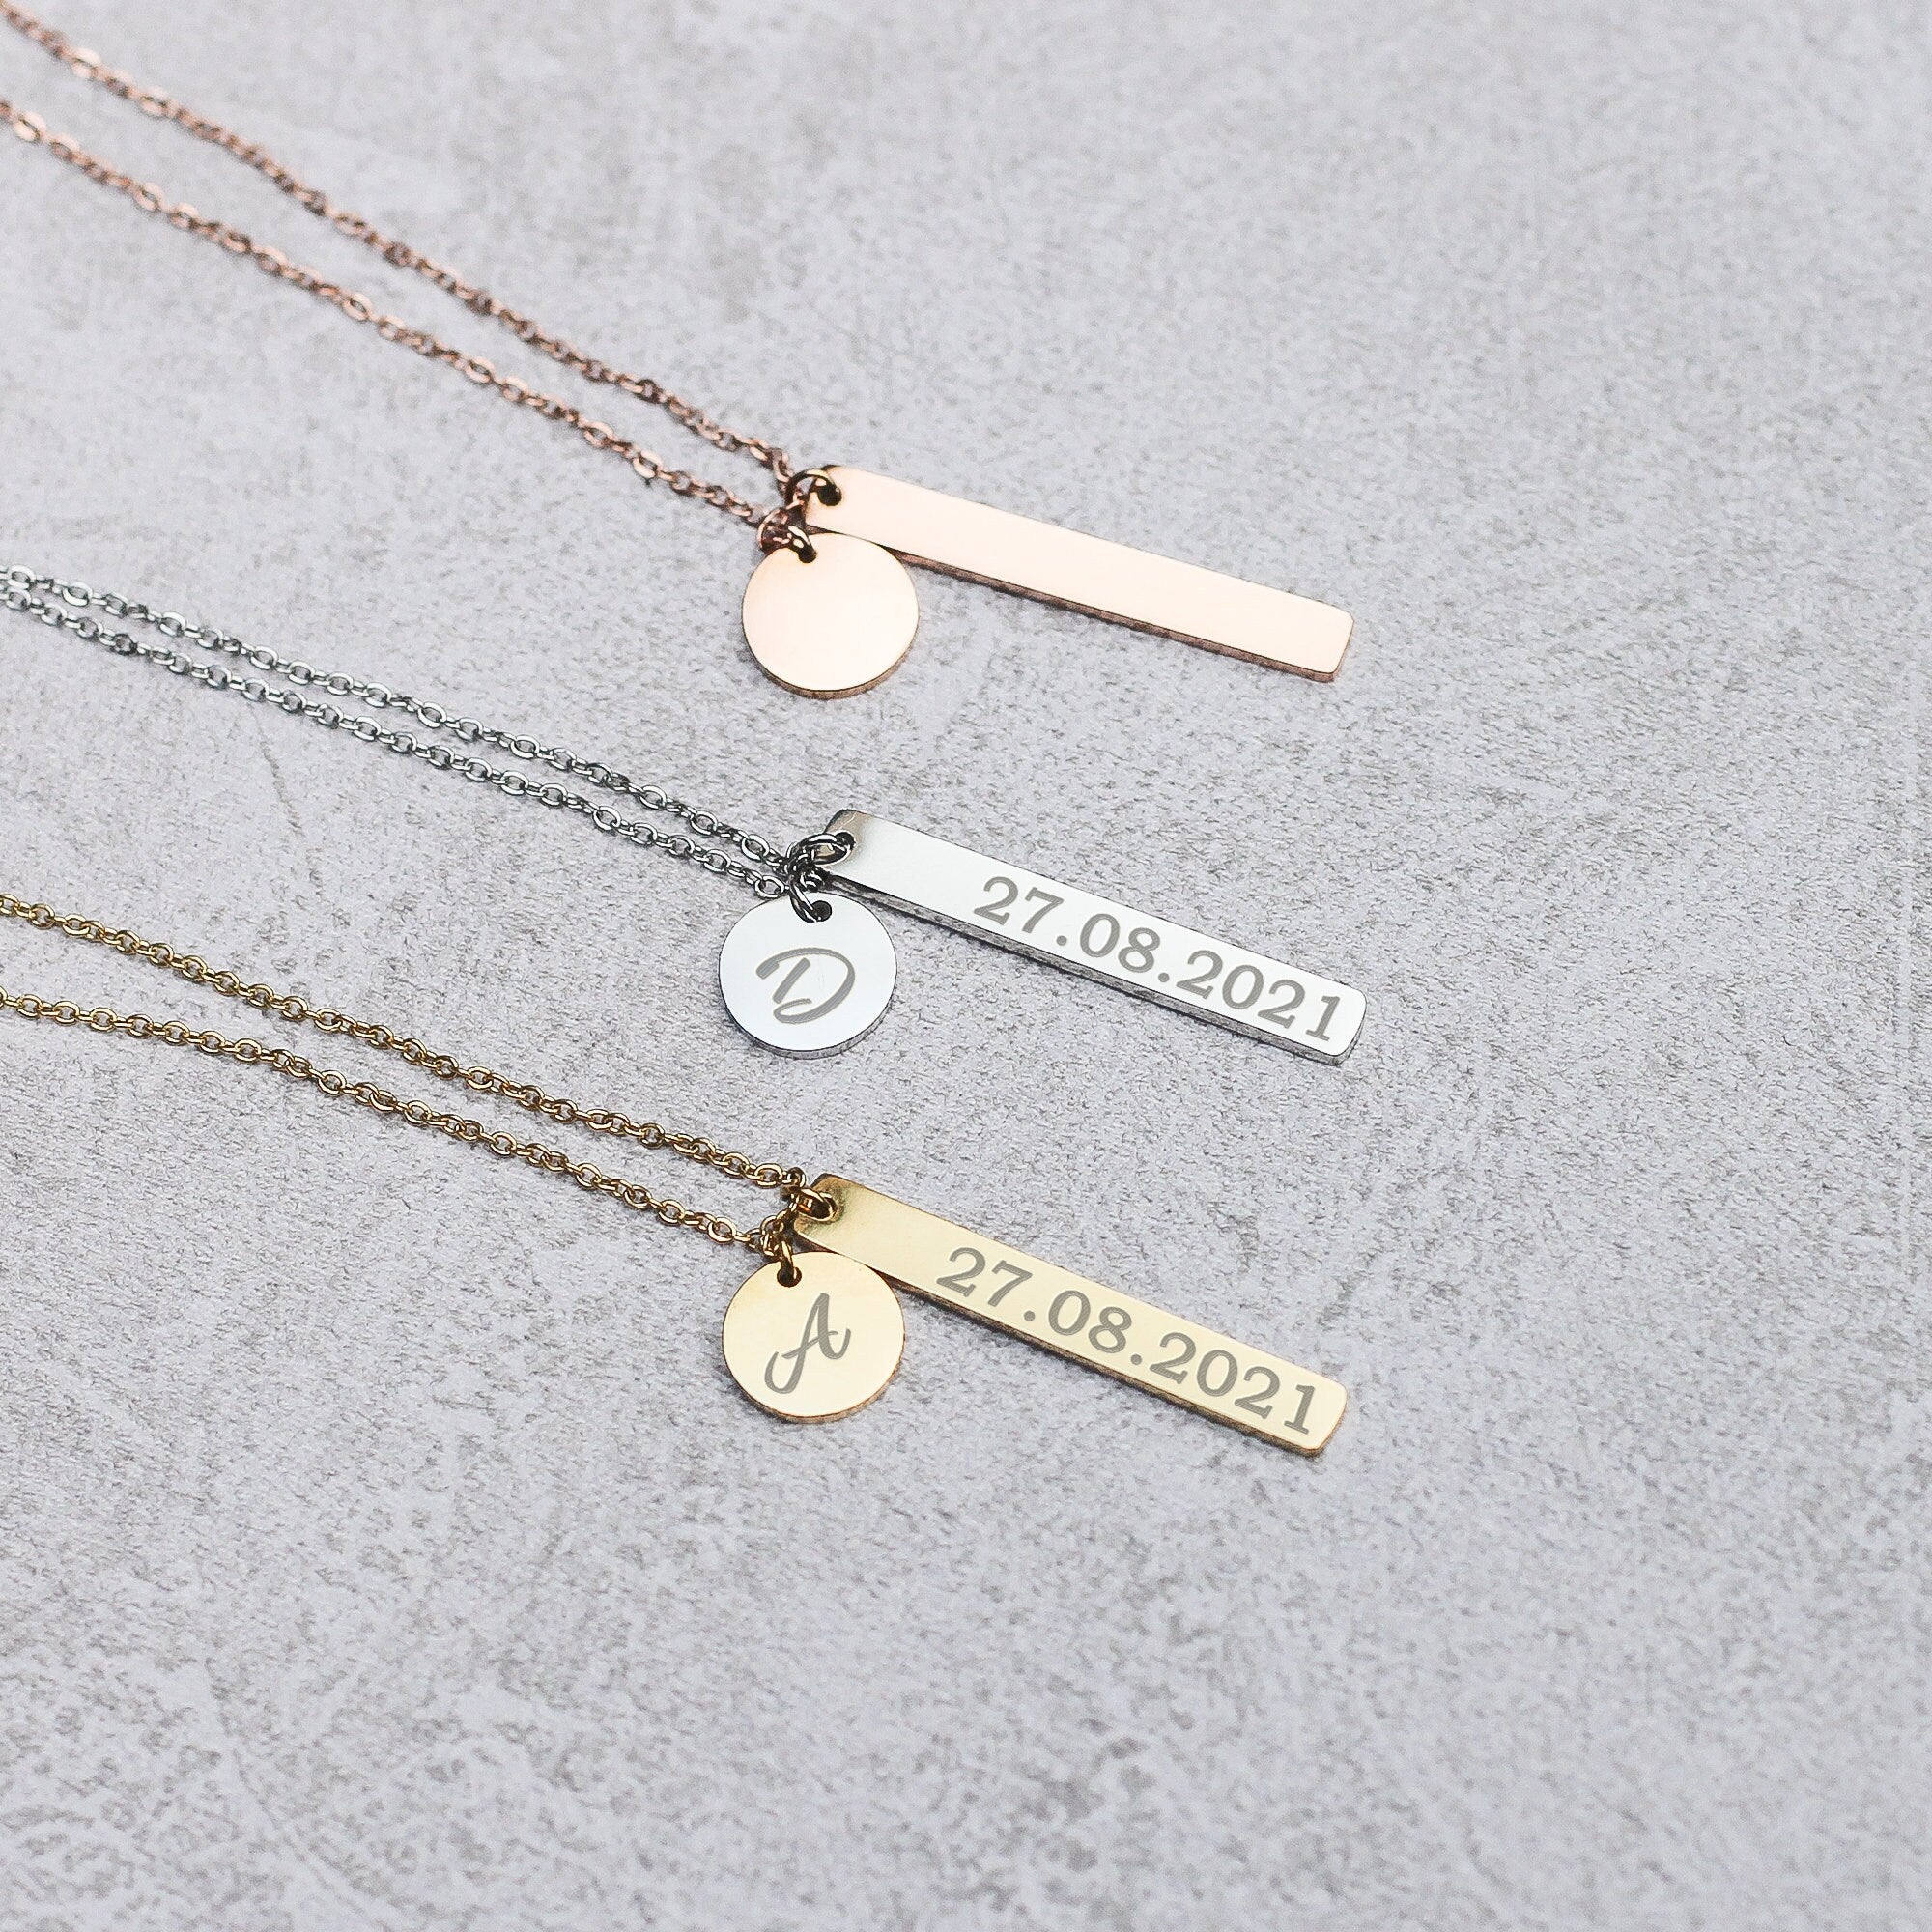 Skinny Personalised Bar Necklace - Reversible Bar Necklace - Name Necklace  - Date Necklace - Personalised Necklace